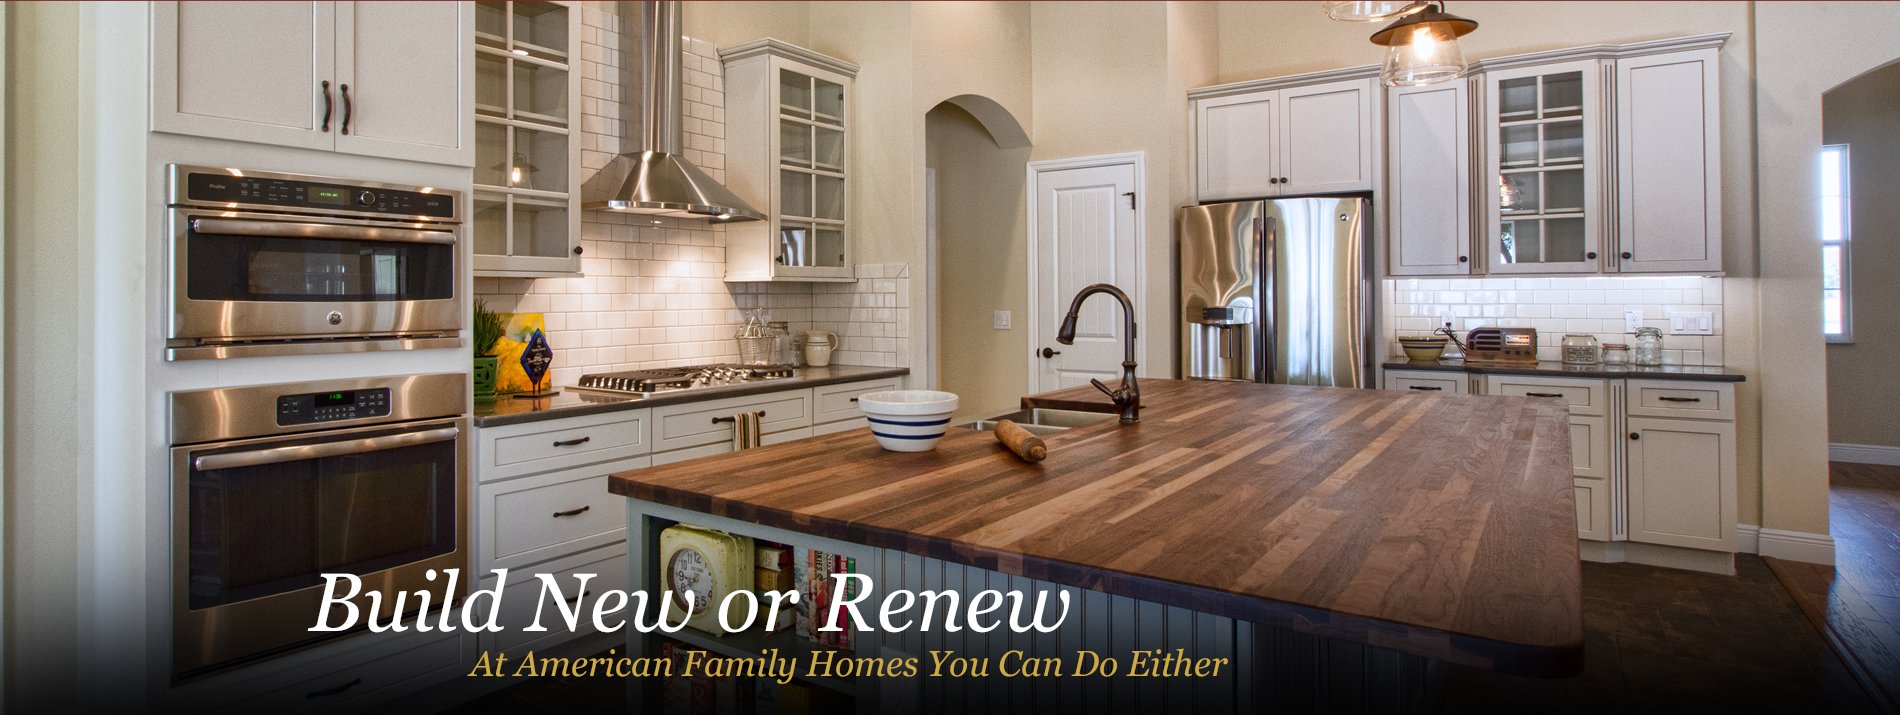 Central Florida Home Builders American Family Homes